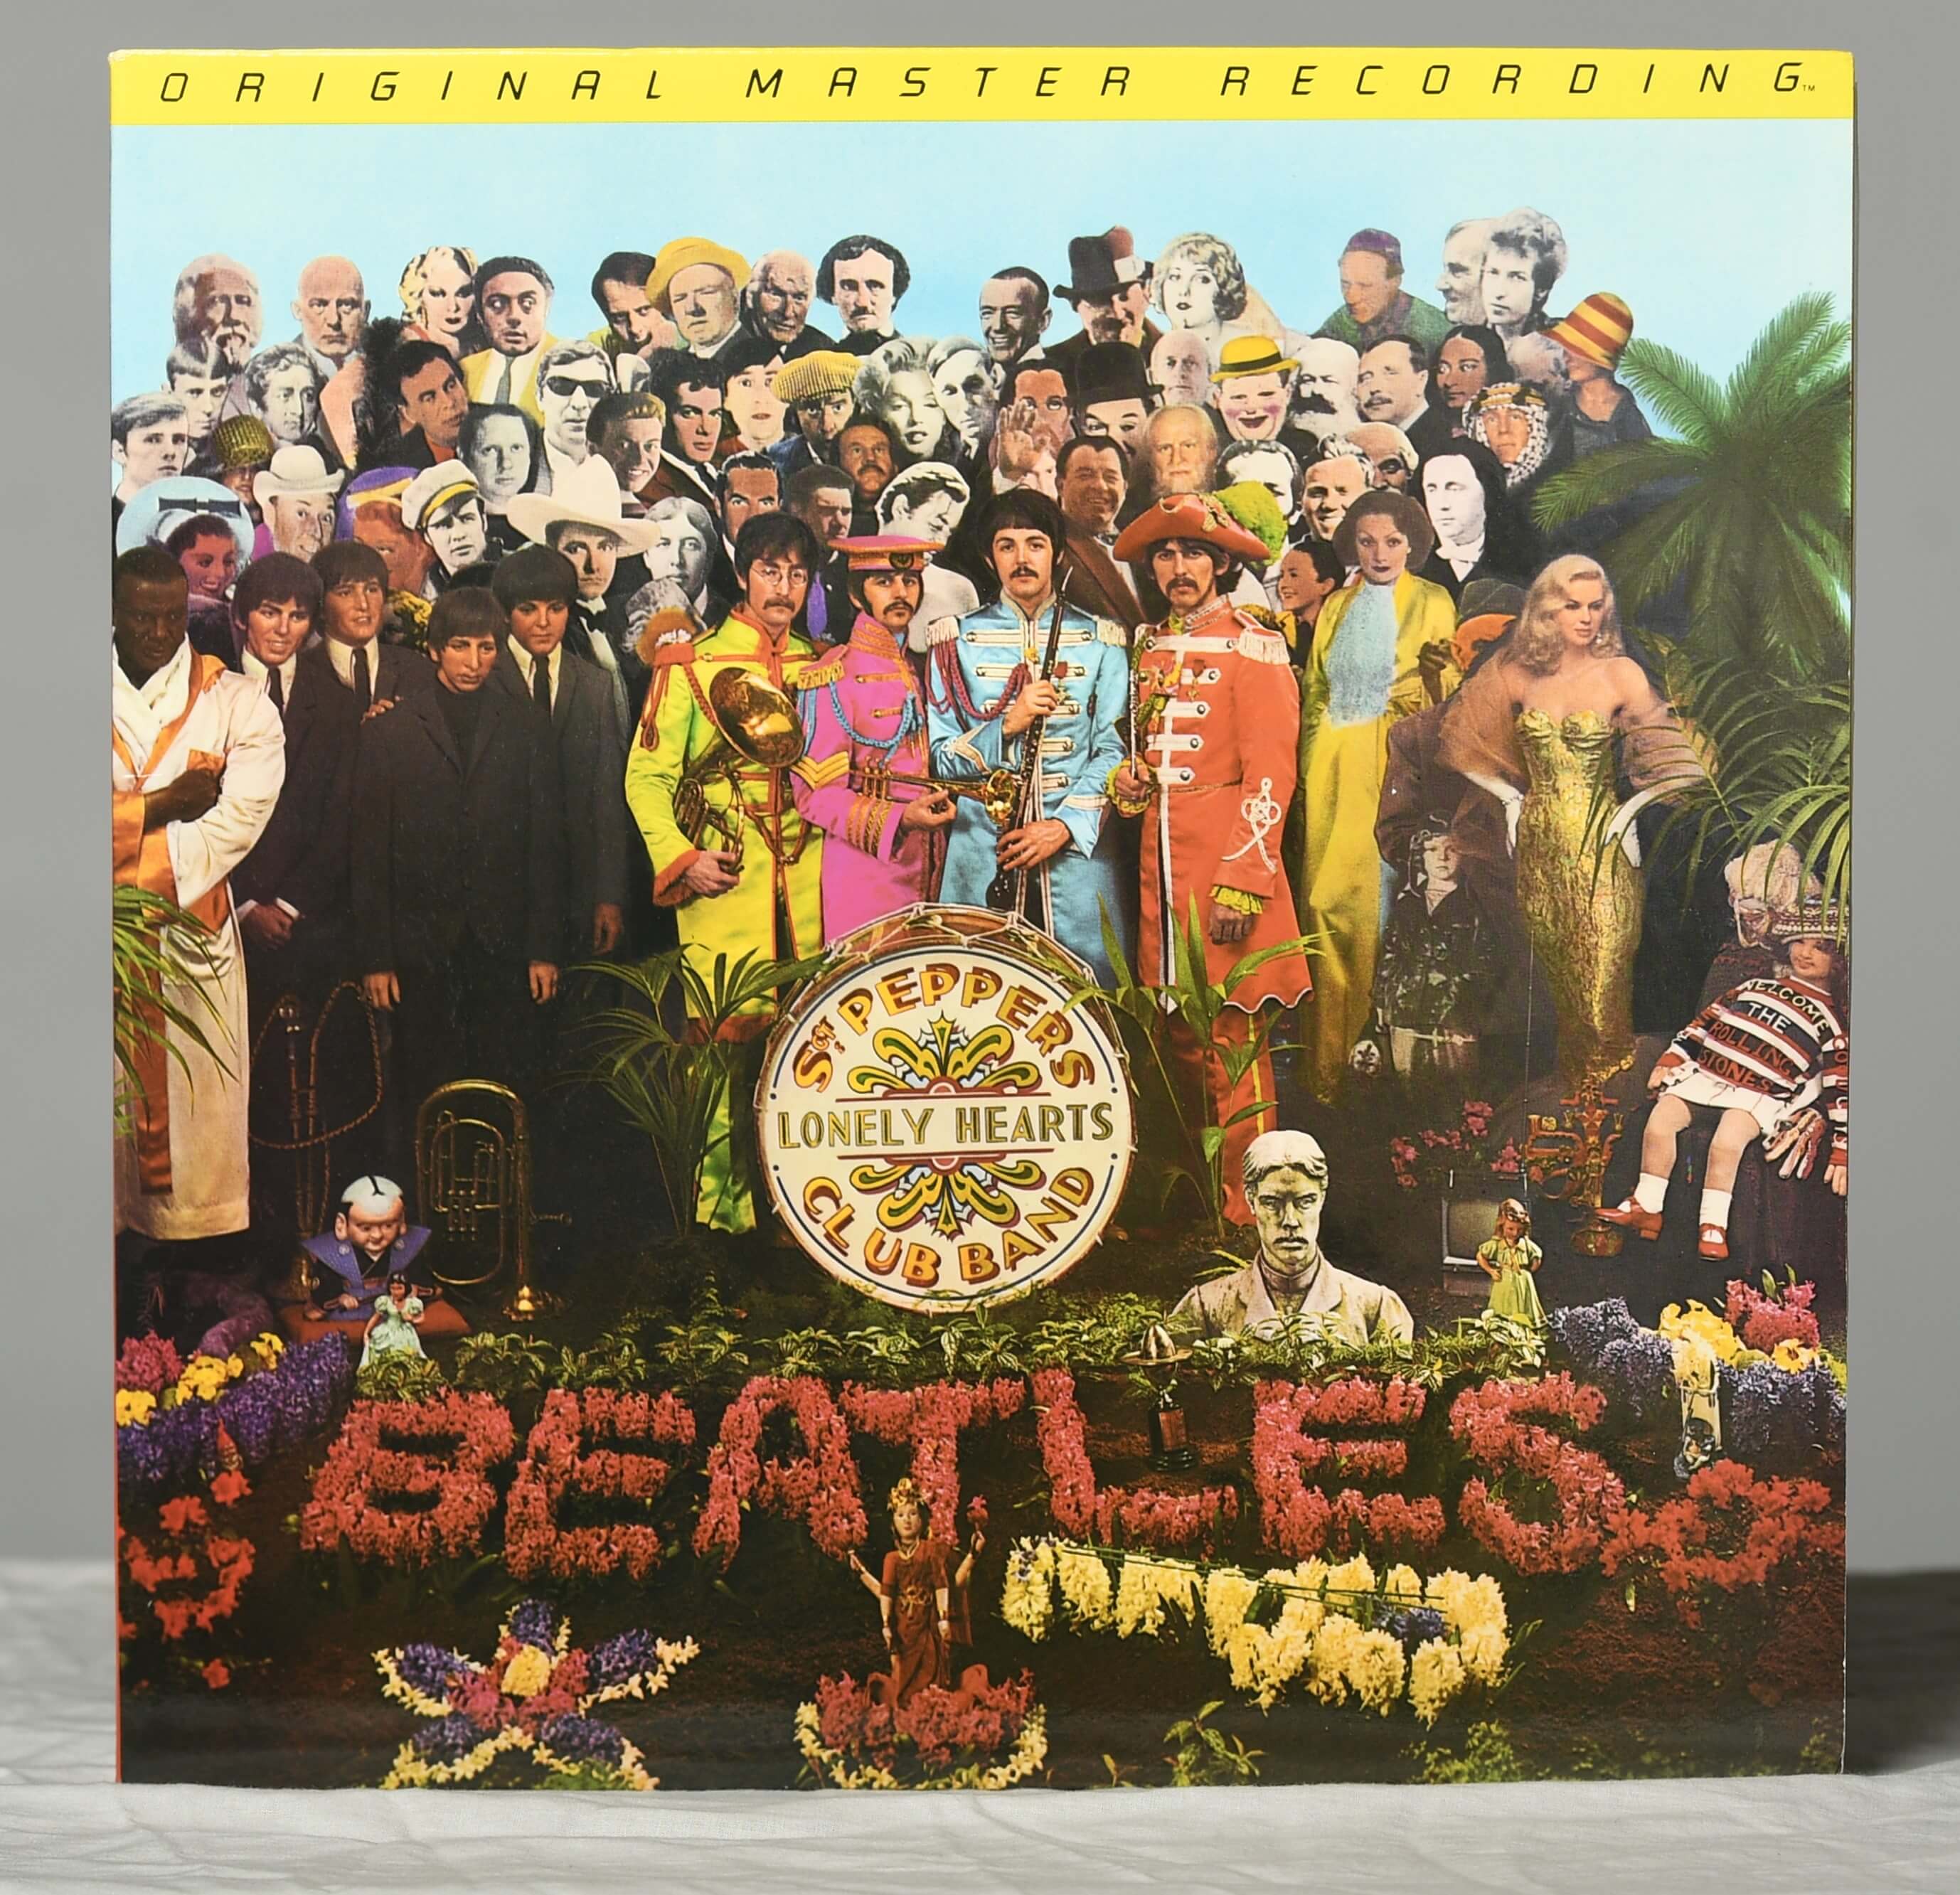 A standing copy of The Beatles' 'Sgt. Pepper'